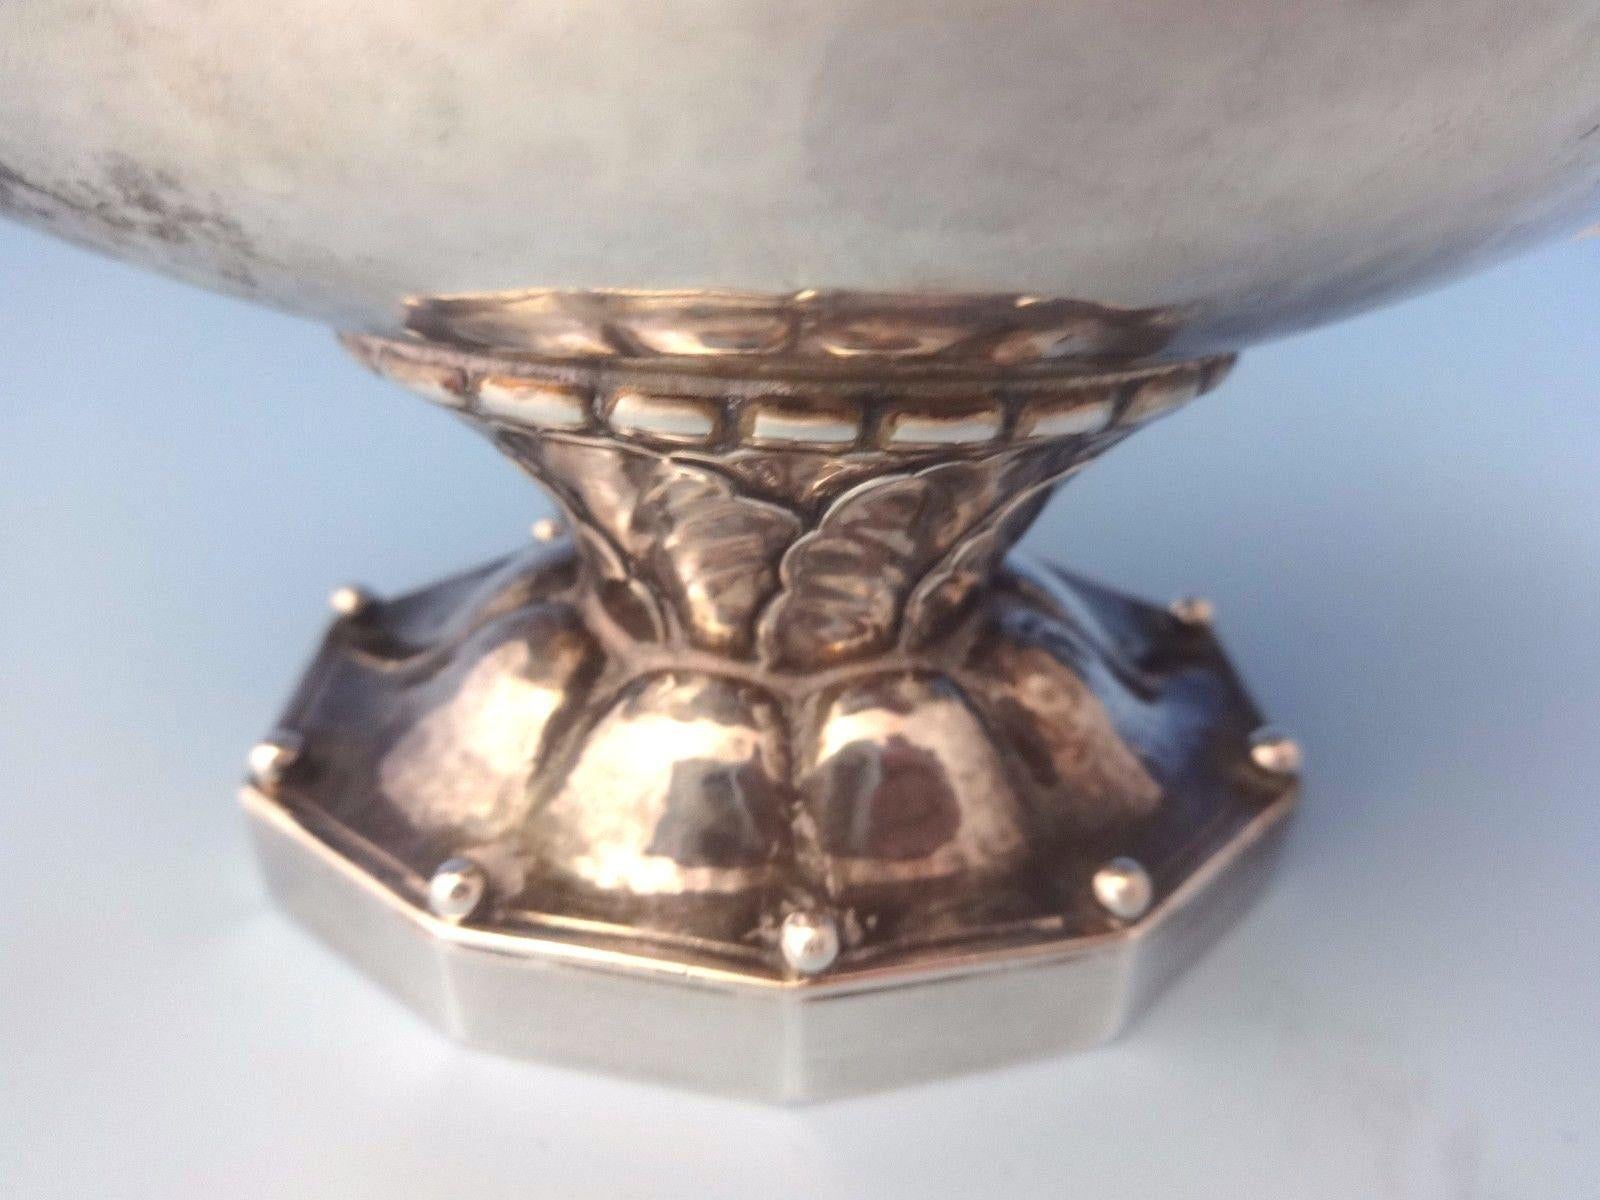 Georg Jensen sterling silver Arts & Crafts Aladdin oil L style cigar lighter #12 with wonderful leaf and beaded detail by Georg Jensen. It has old GI marks, and dates from 1915-1930. It is not monogrammed. It no longer has the flame snuffer on the